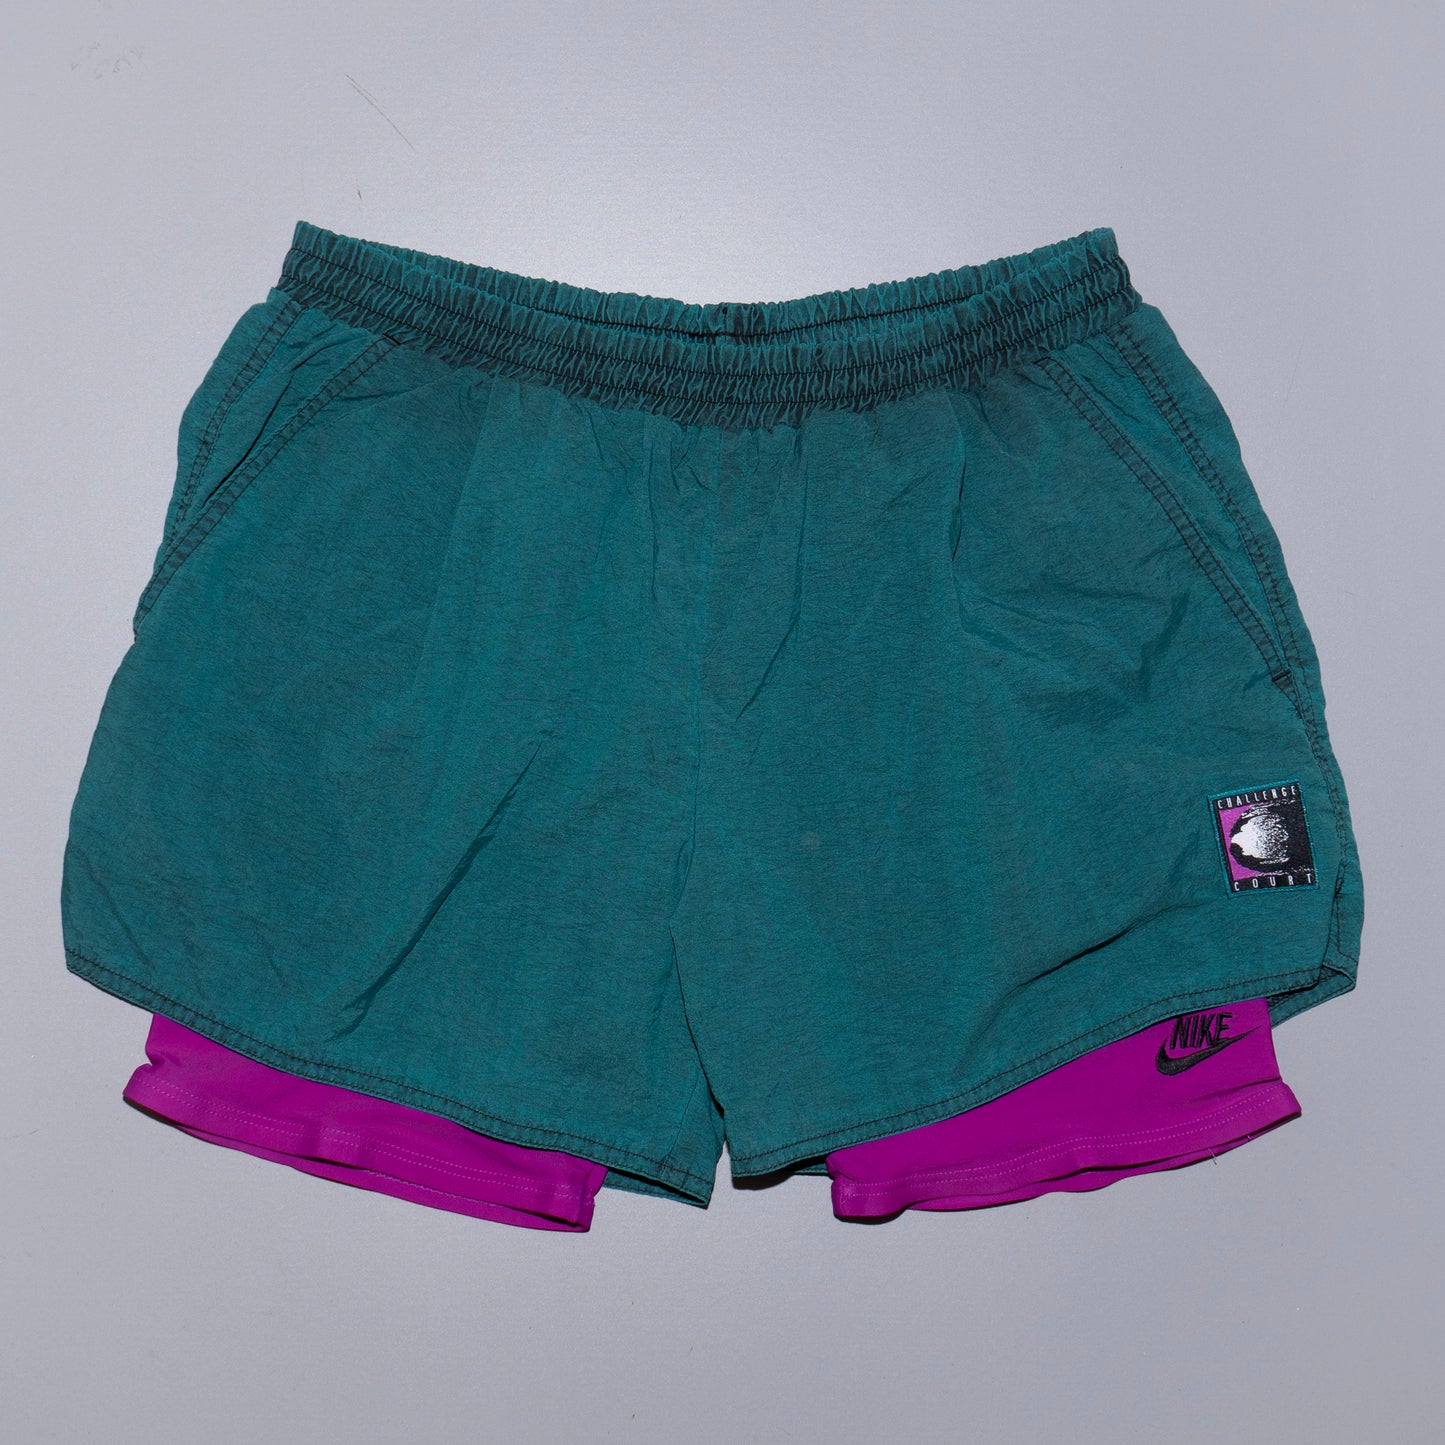 Challenge Court Andrew Agassi Shorts, M